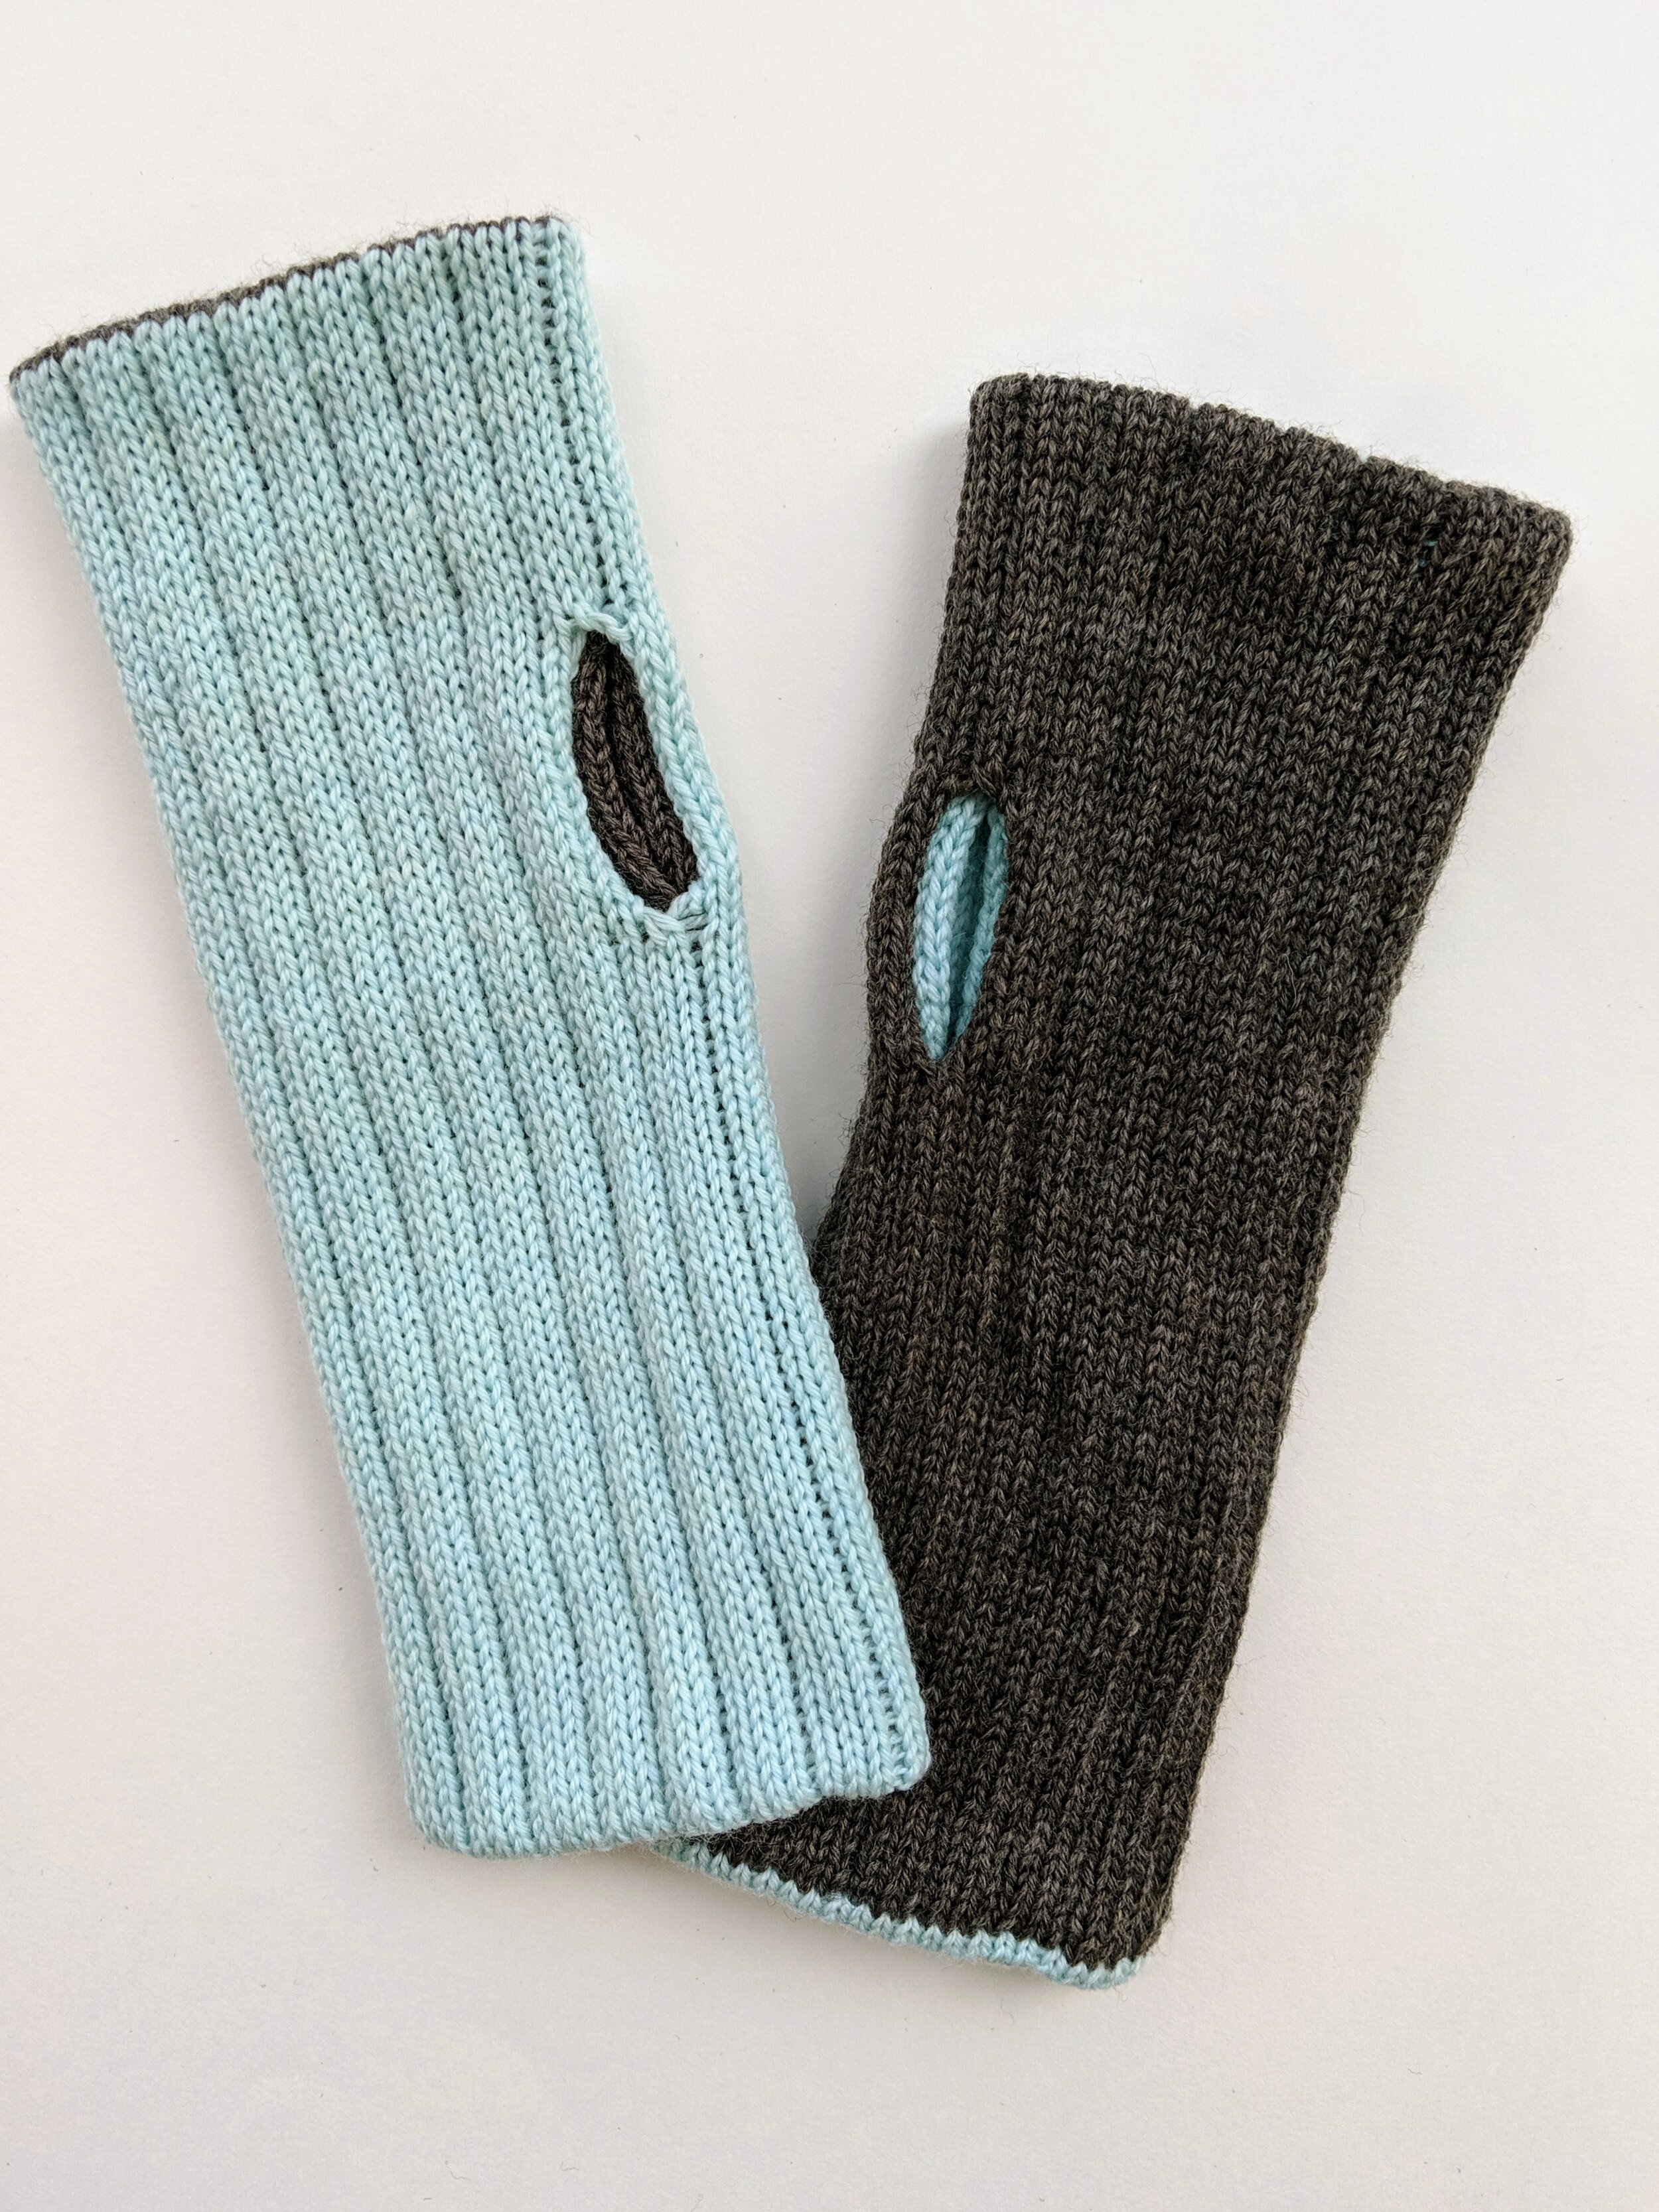 Reversible hand warmers; wool and nylon